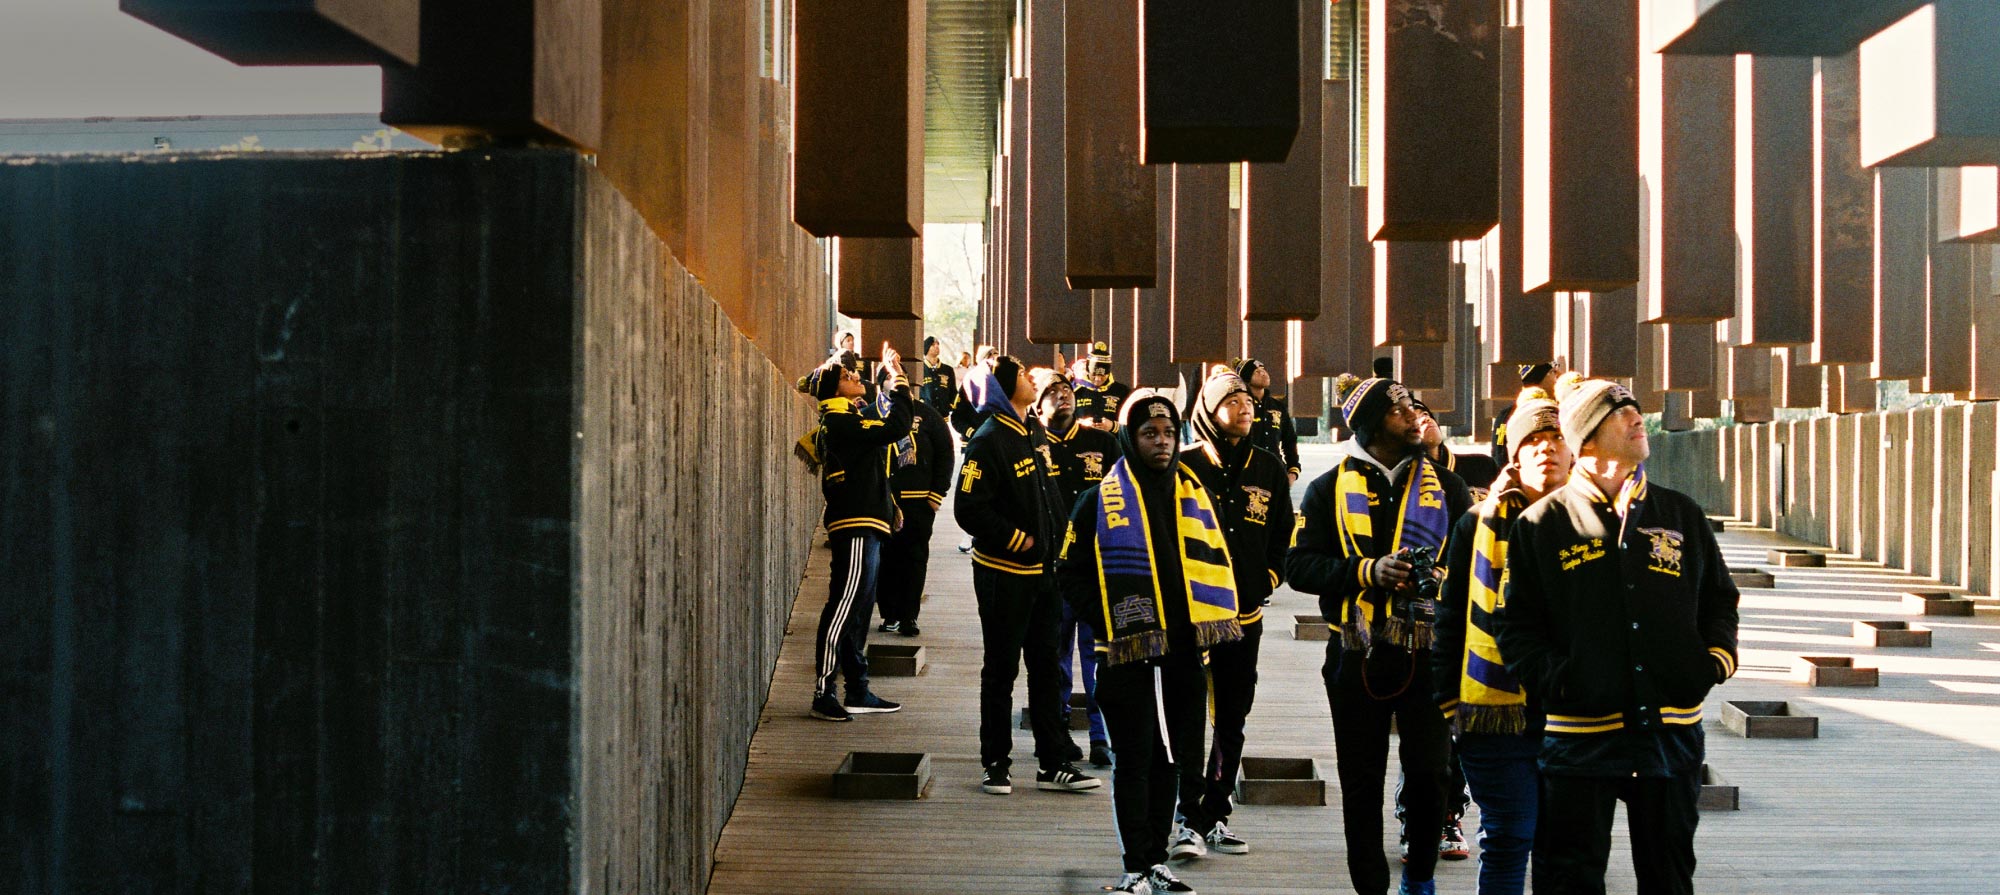 Members of a fraternity in matching jackets and scarves visit the National Memorial for Peace and Justice.